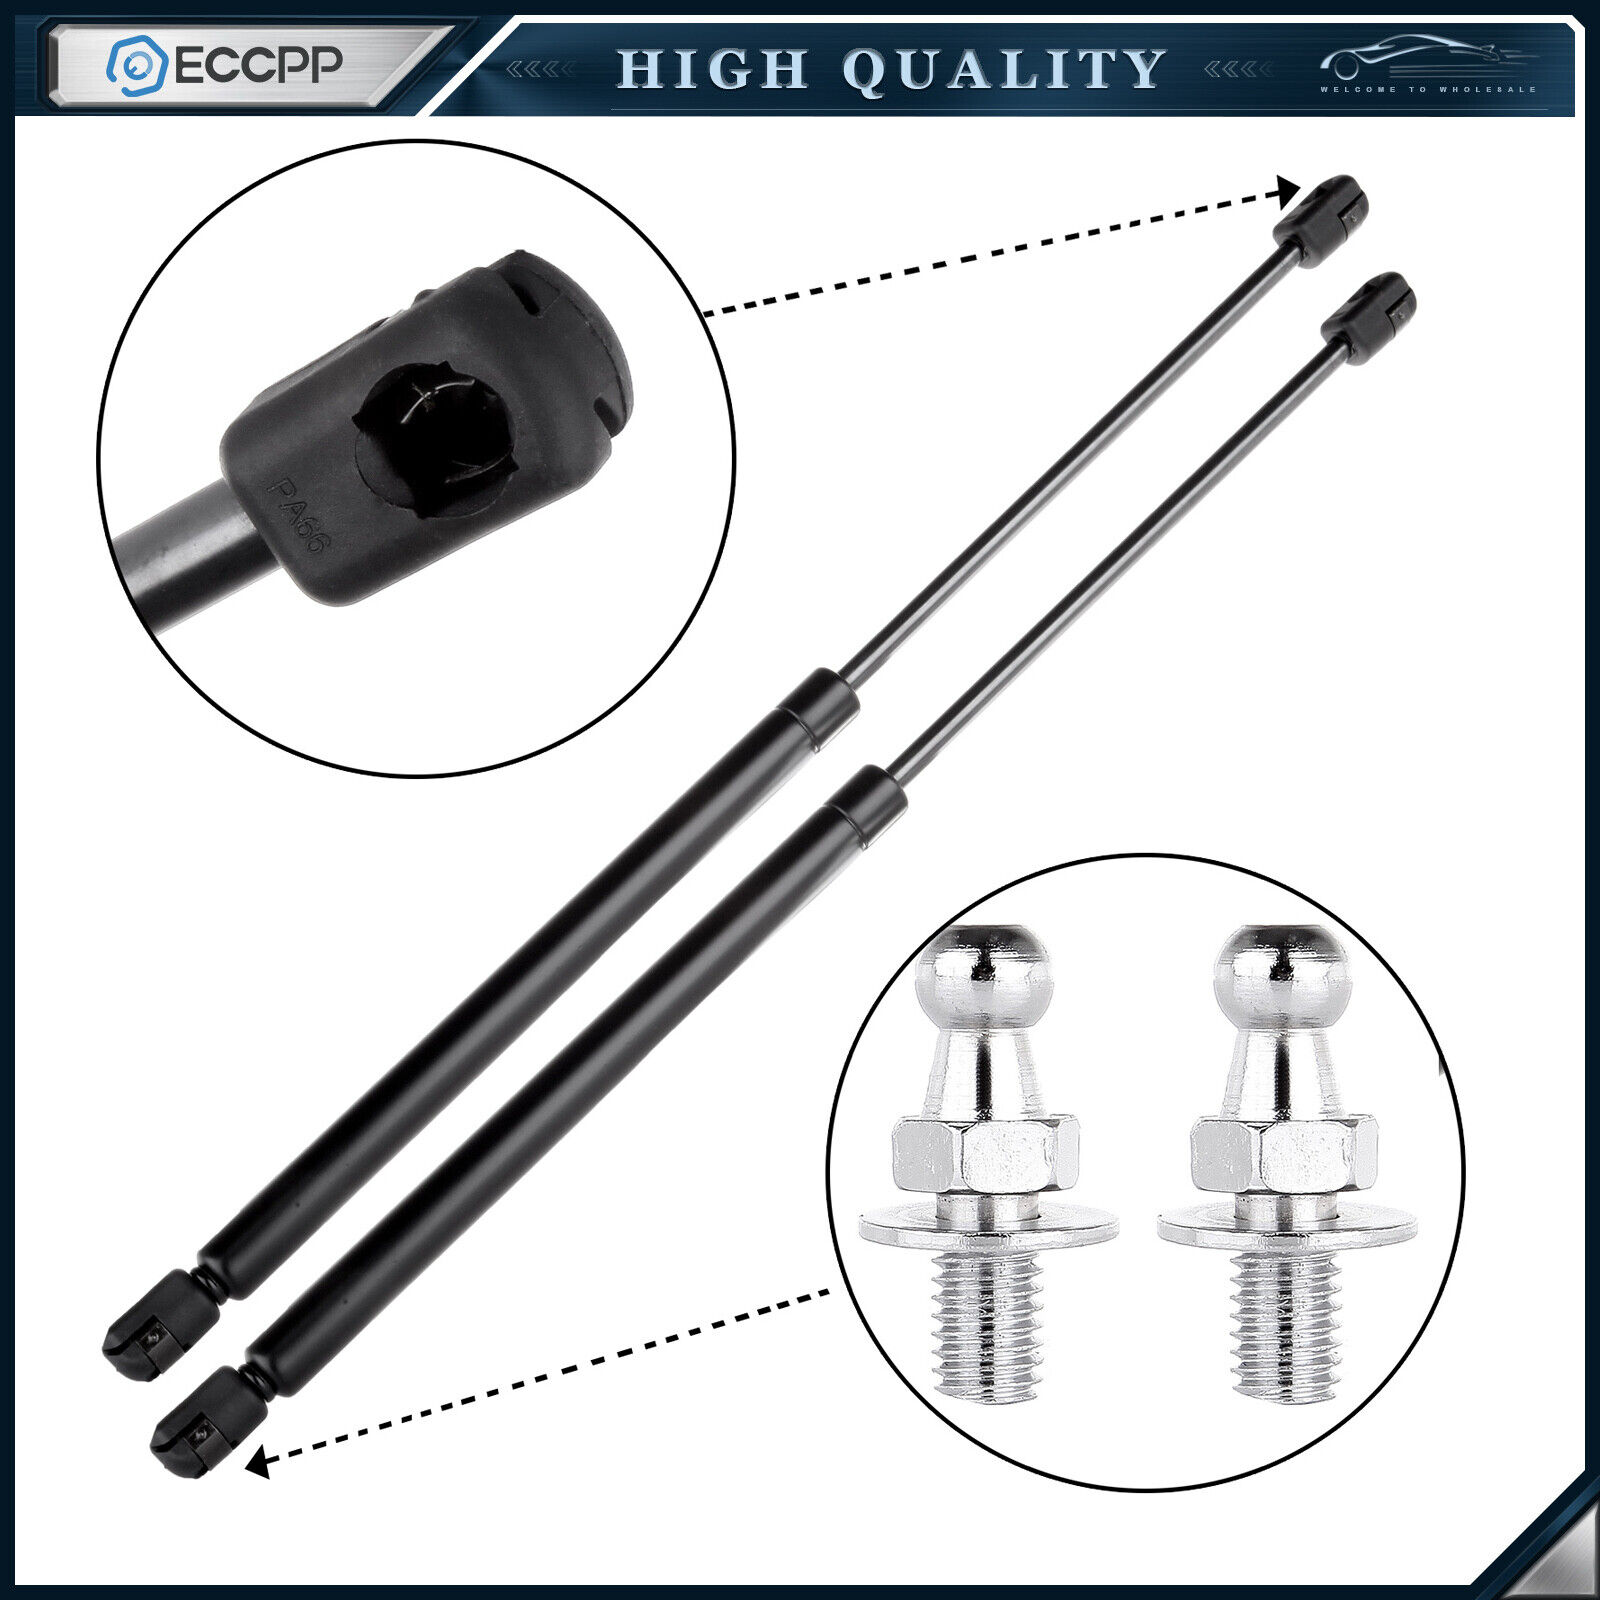 ECCPP 2x Front Hood Lift Supports Struts Springs For Dodge Ram 2002-2010 4364